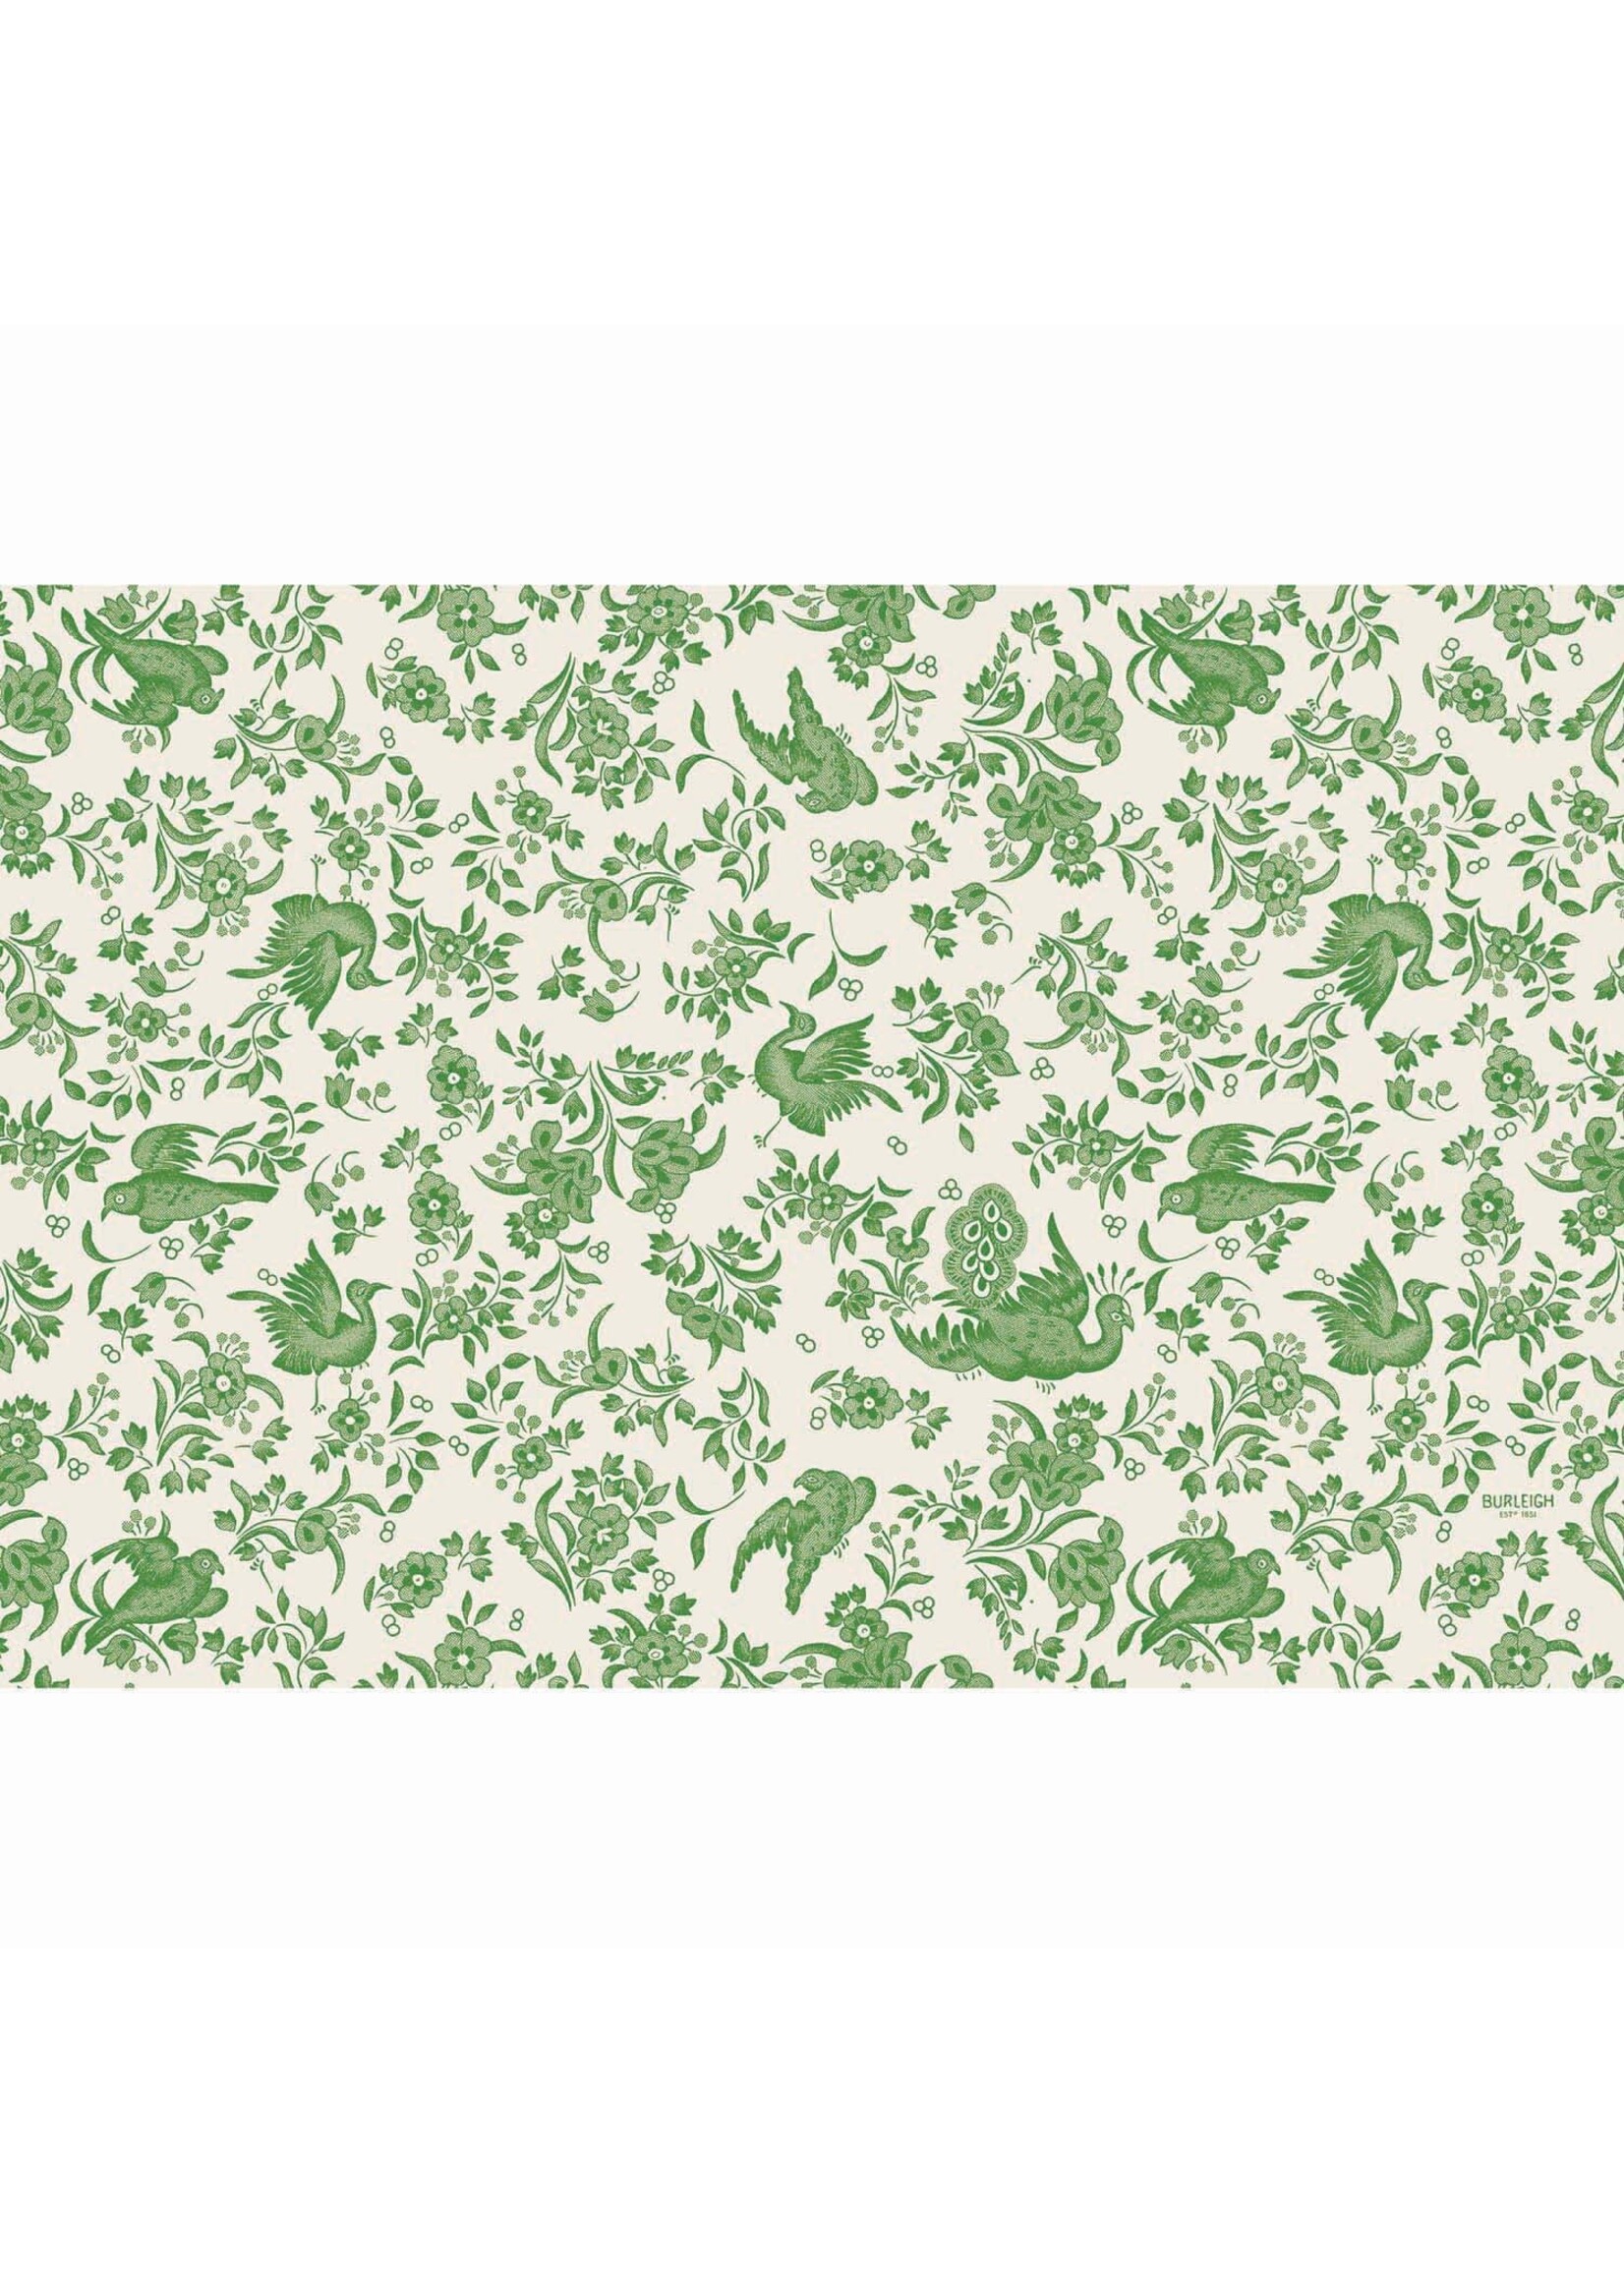 Hester & Cook Paper Placemats - Regal Peacock Green (24 sheets)